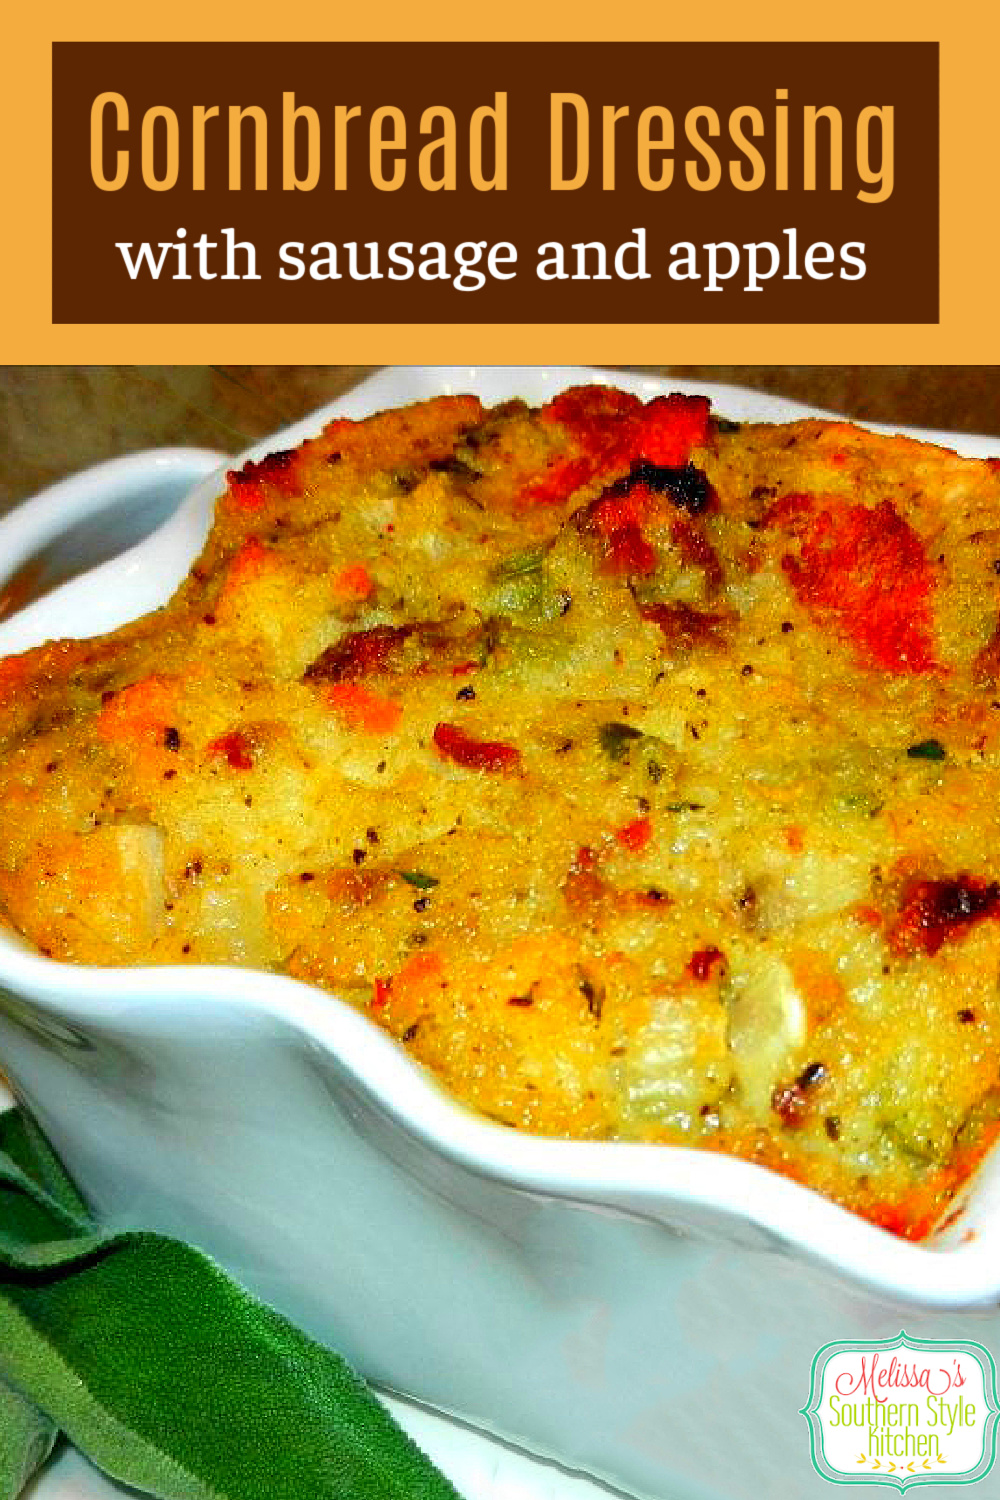 This flavorful Cornbread Dressing with Sausage and Apples and seasoned with fresh sage is a guaranteed win for your holiday side dish menu #cornbreaddressing #southerncornbread #dressing #thanksgivingrecipes #sausagedressing #dressingsausageapples #sidedishrecipes #holidaysidedish #holidaysidesdishrecipes via @melissasssk